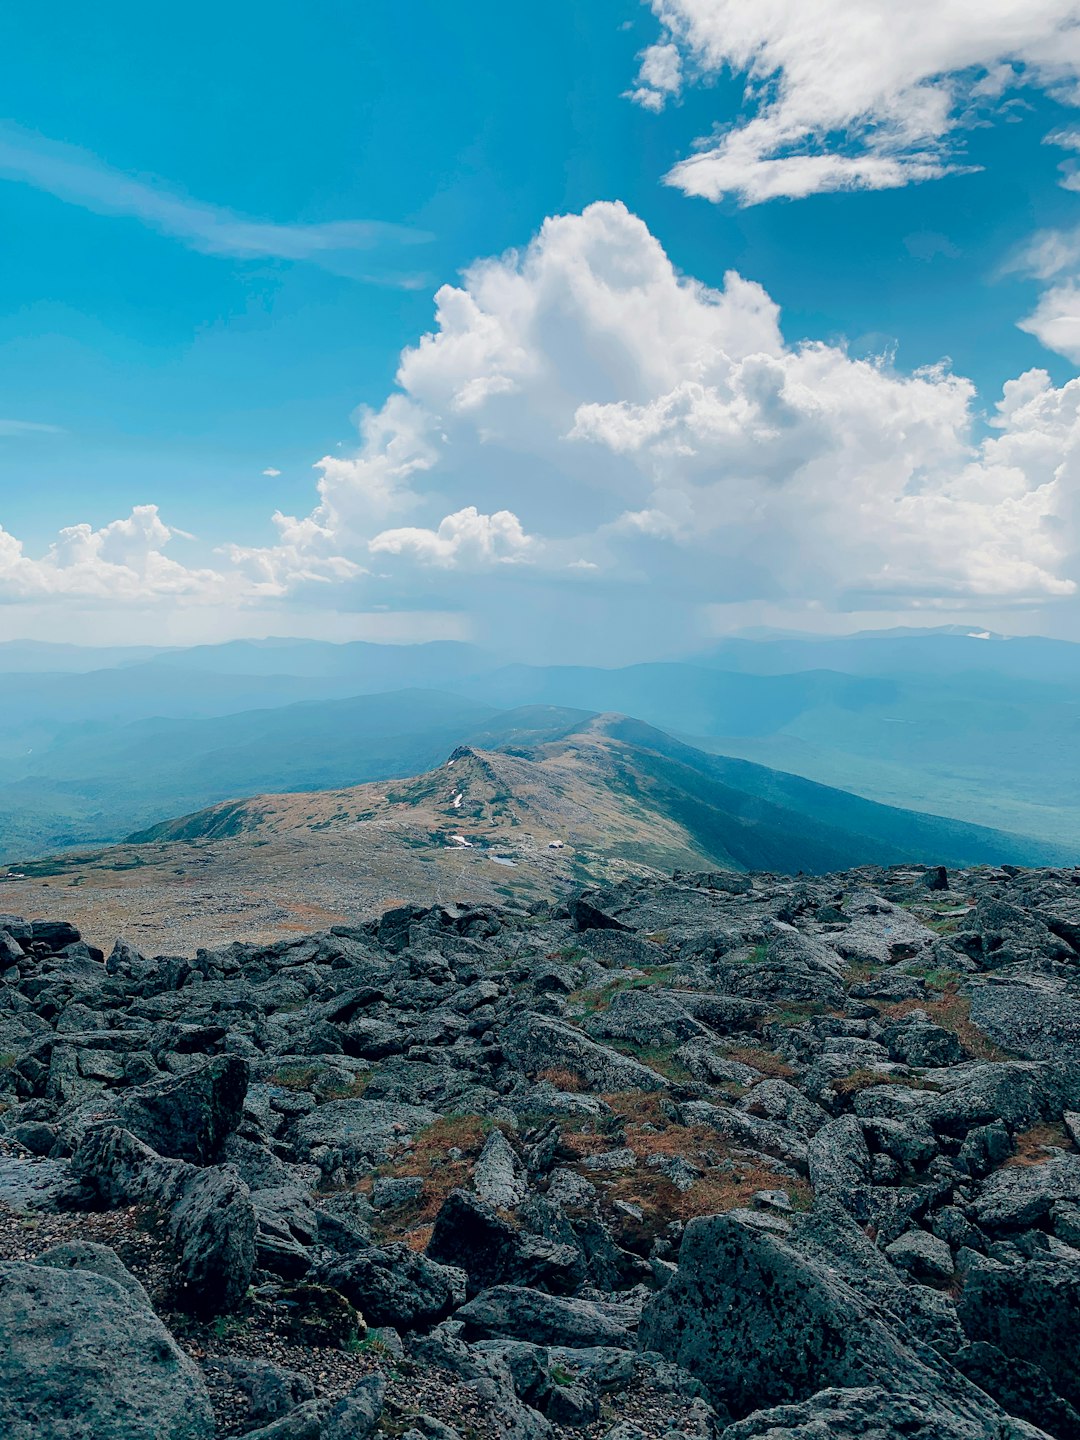 travelers stories about Hill in Mt. Washington State Park, United States